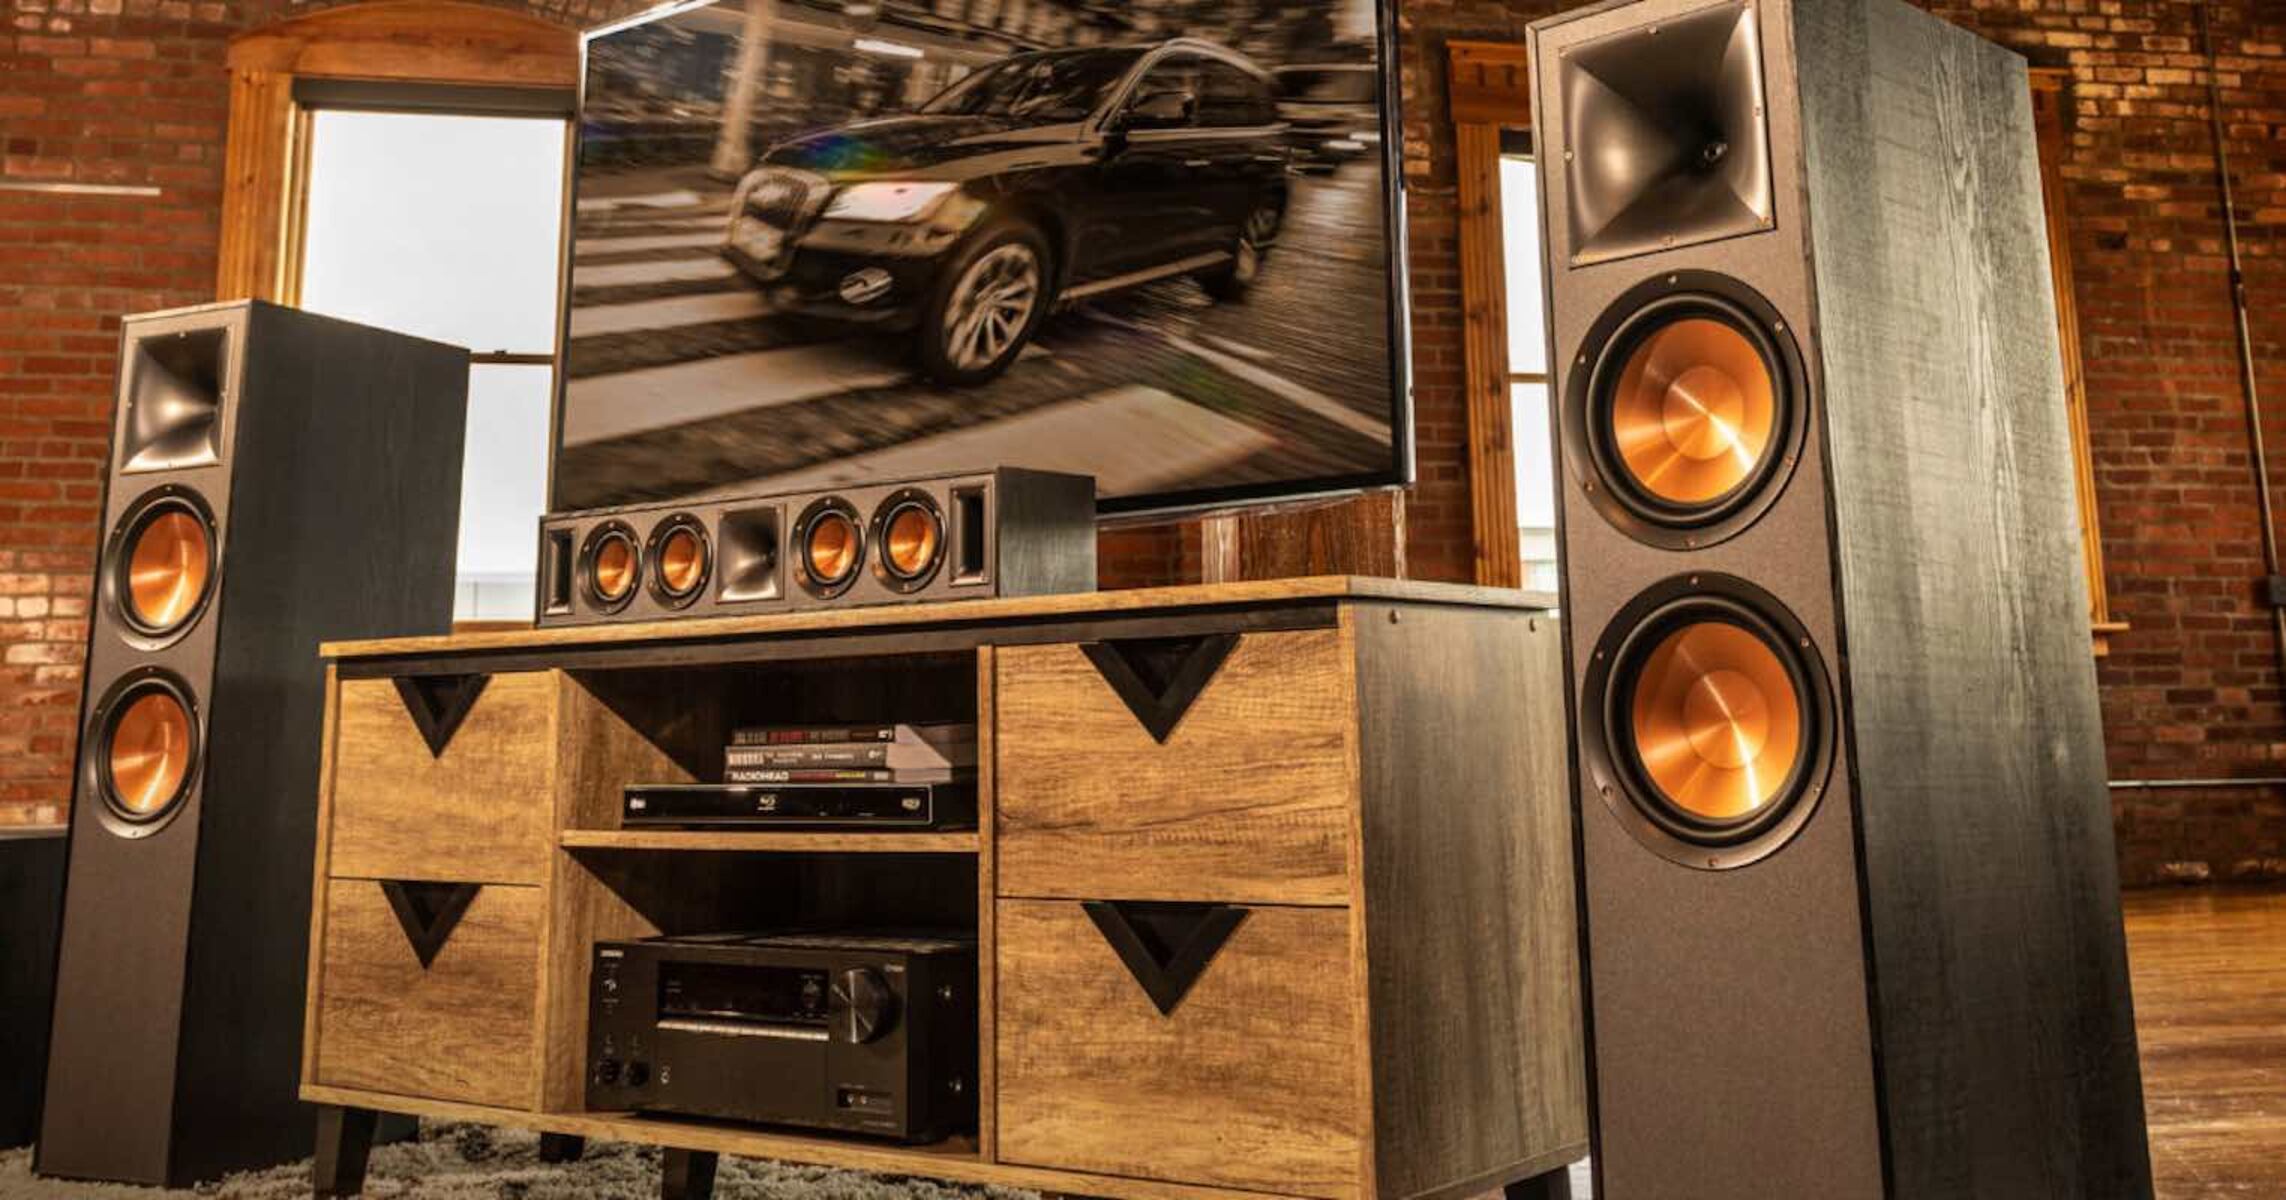 How To Set Up A 1990 Sony Surround Sound System